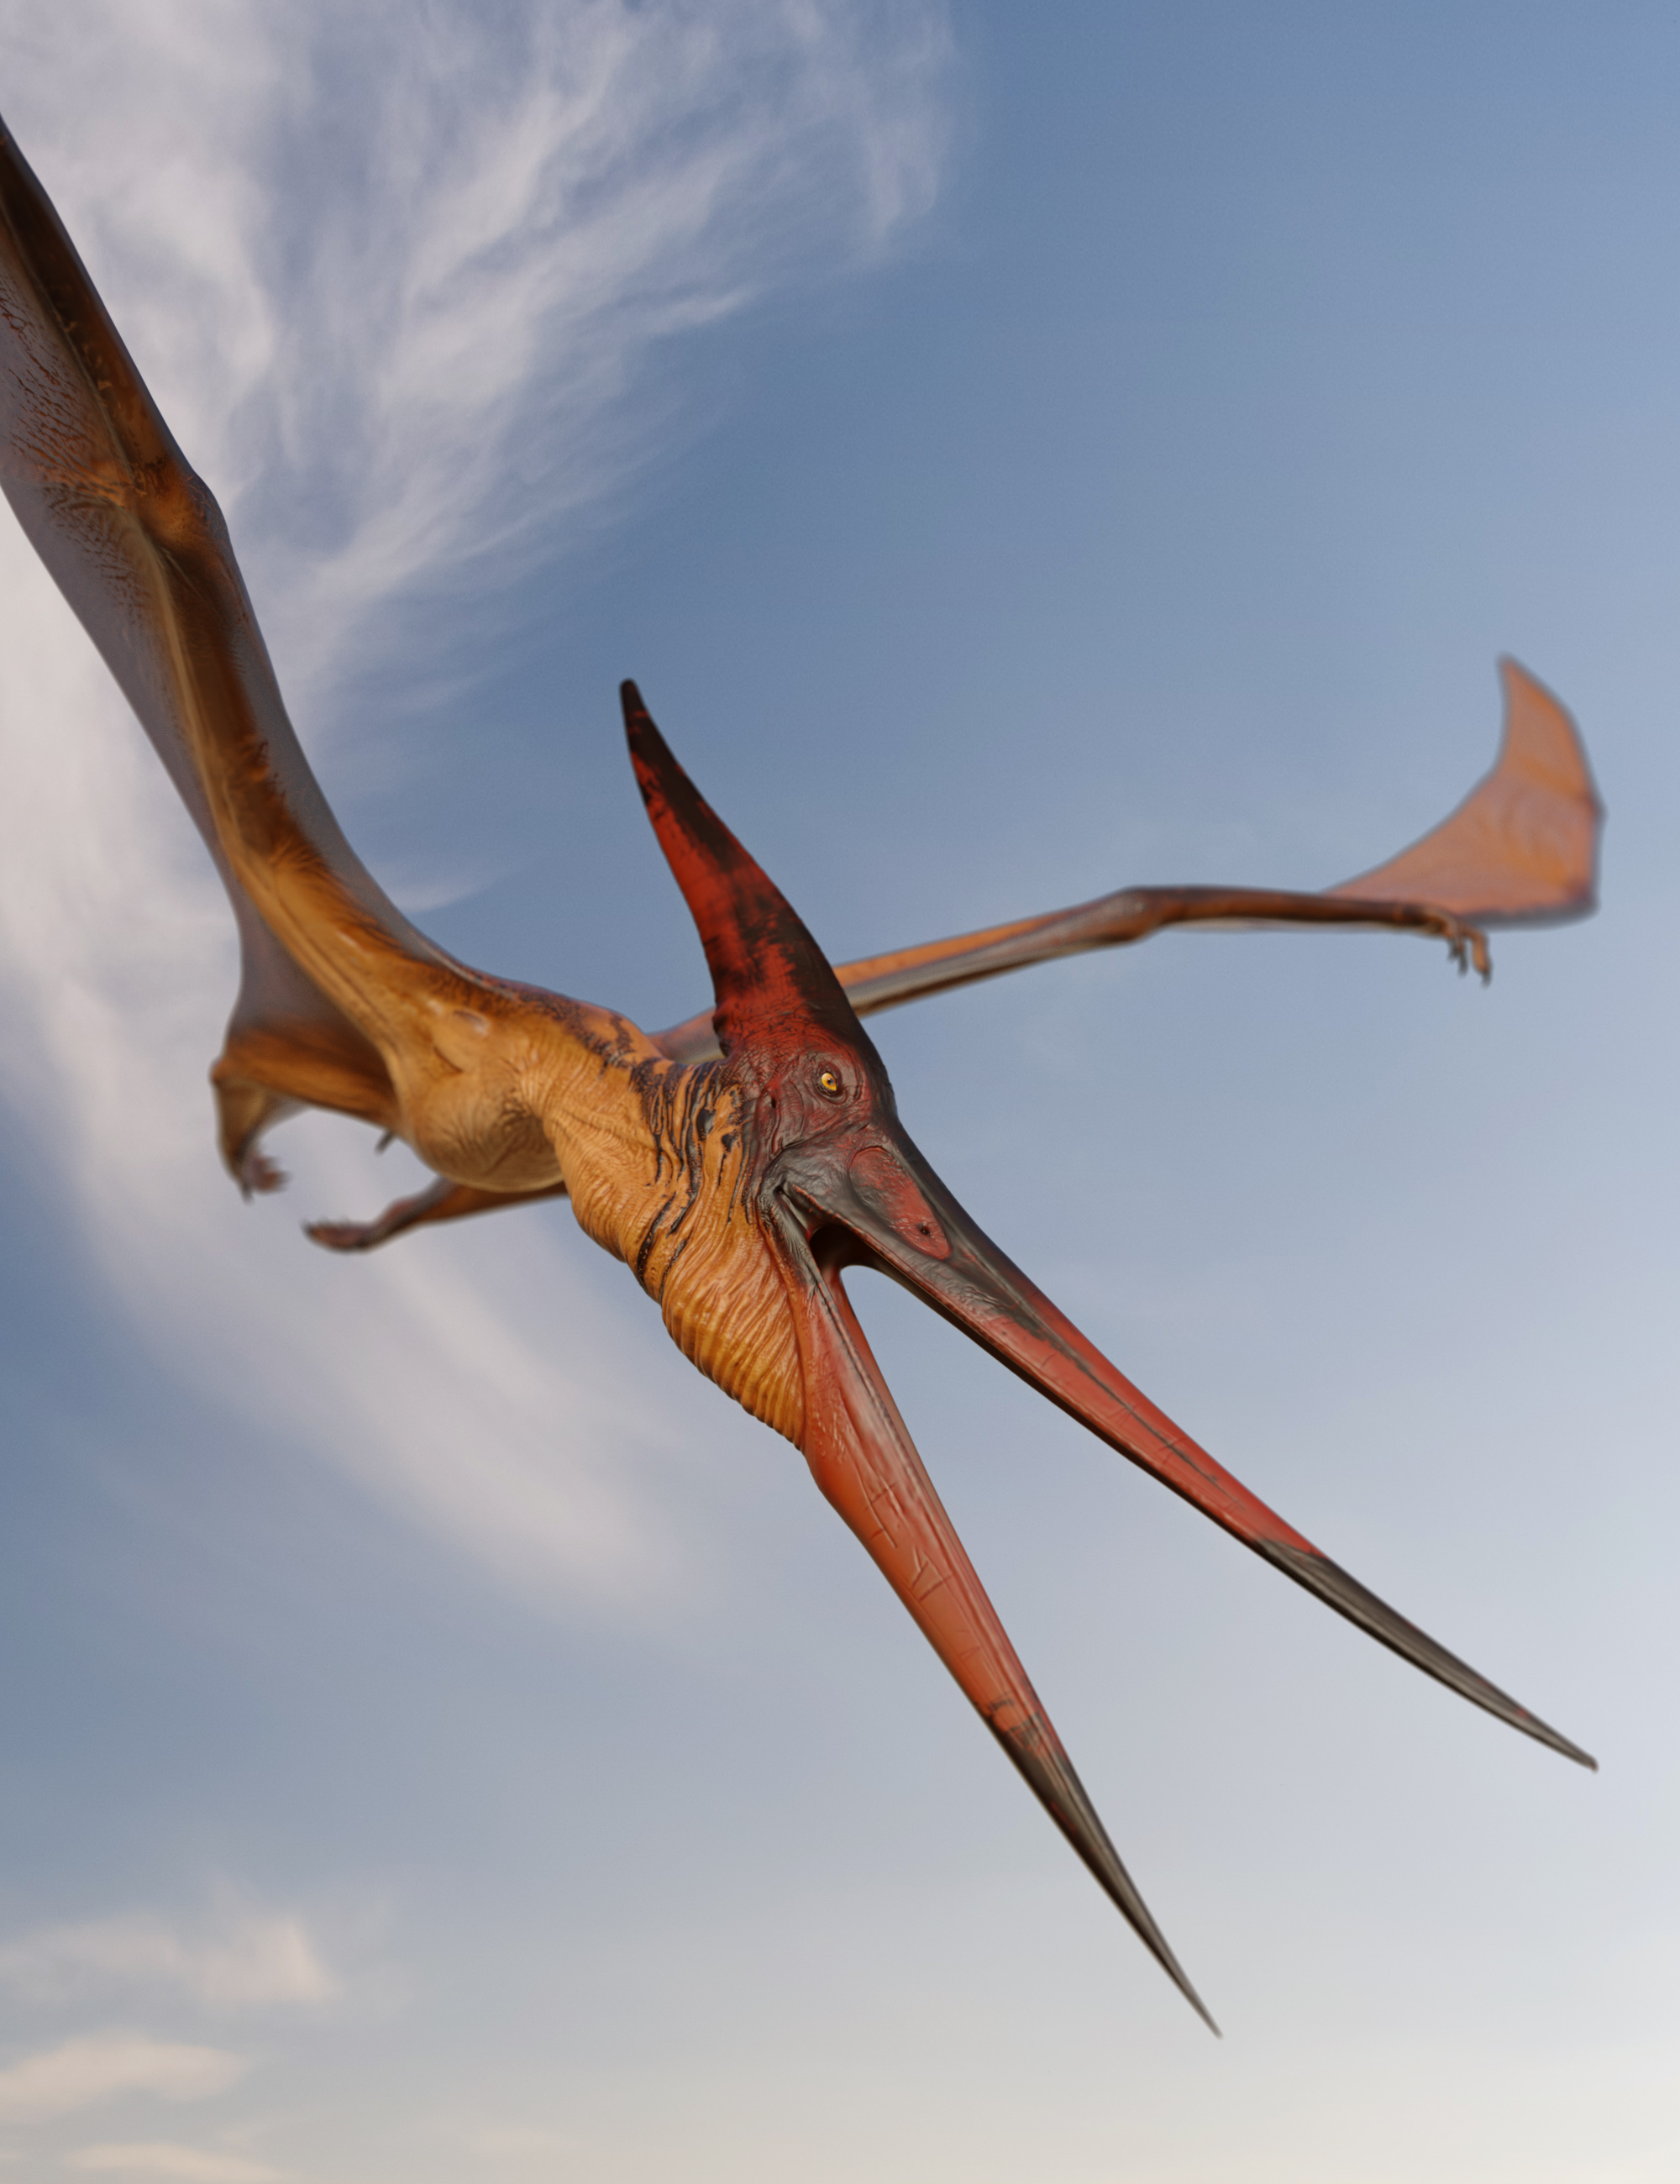 dForce Pteranodon by AM by: Alessandro_AM, 3D Models by Daz 3D